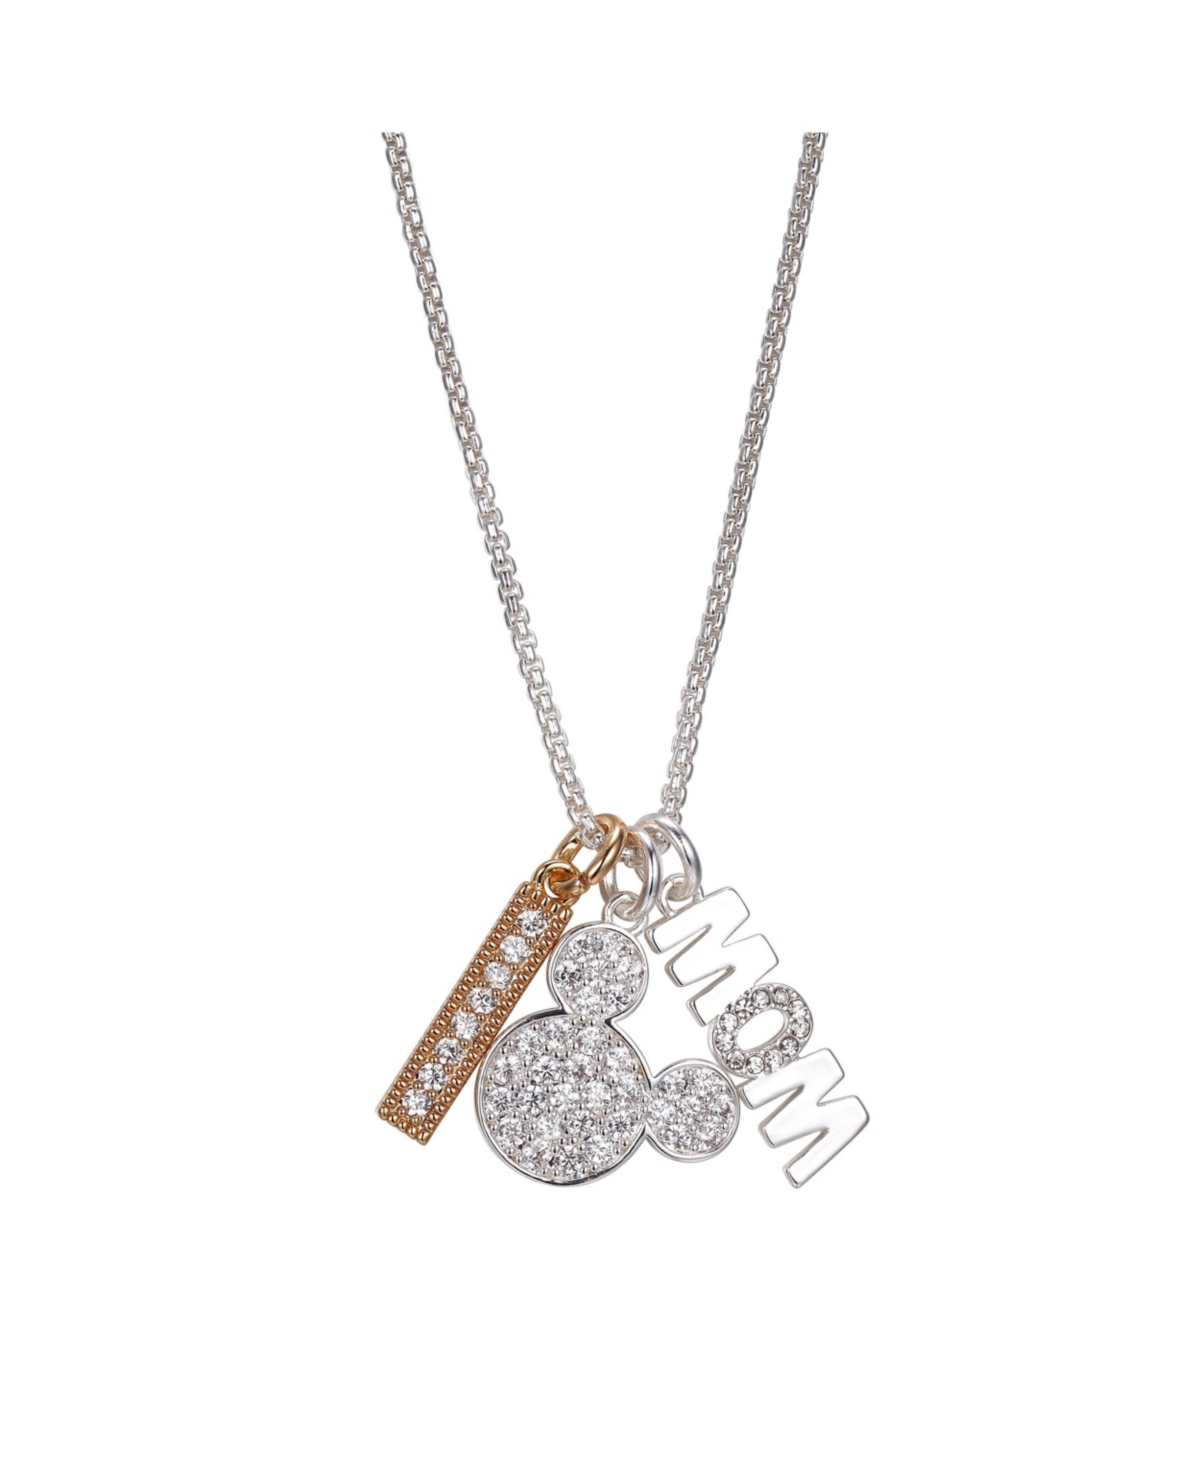 Silver Plated Mickey Mouse "Mom" and Clear Crystal Bar Charm Necklace, 16"+2" Extender - Yellow